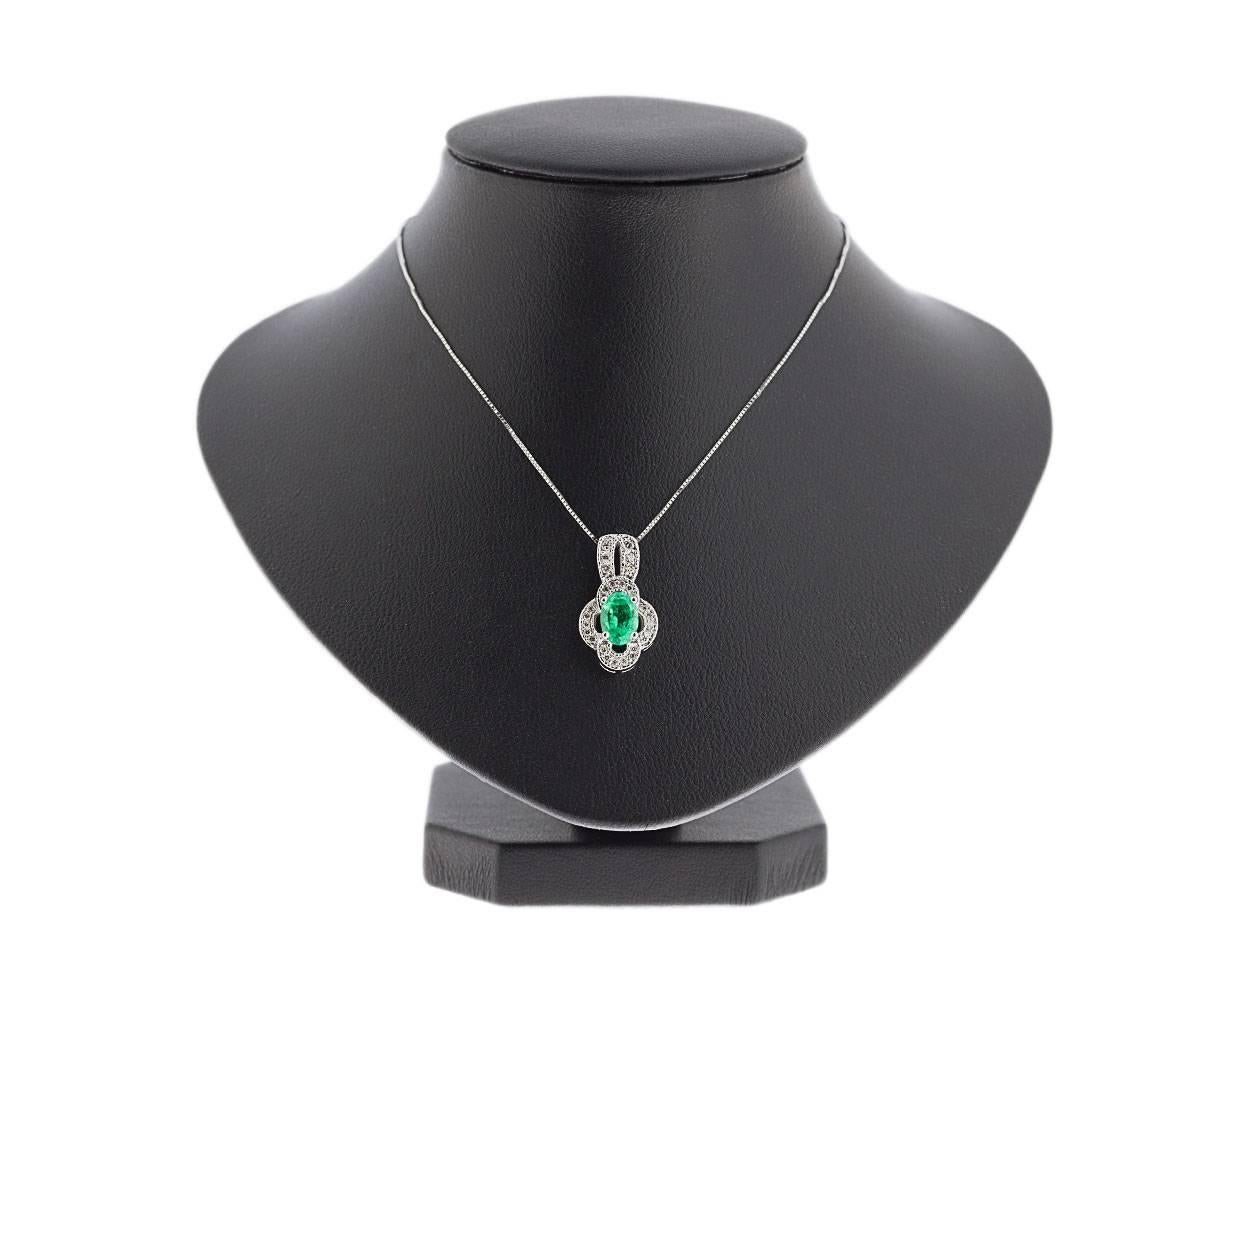 Simple yet elegant & beautiful would be the best way to describe this stunning necklace! It features a .85 carat, oval cut, natural, green emerald that is prong set in 14 karat white gold. The pendant also features a beautiful scalloped design halo